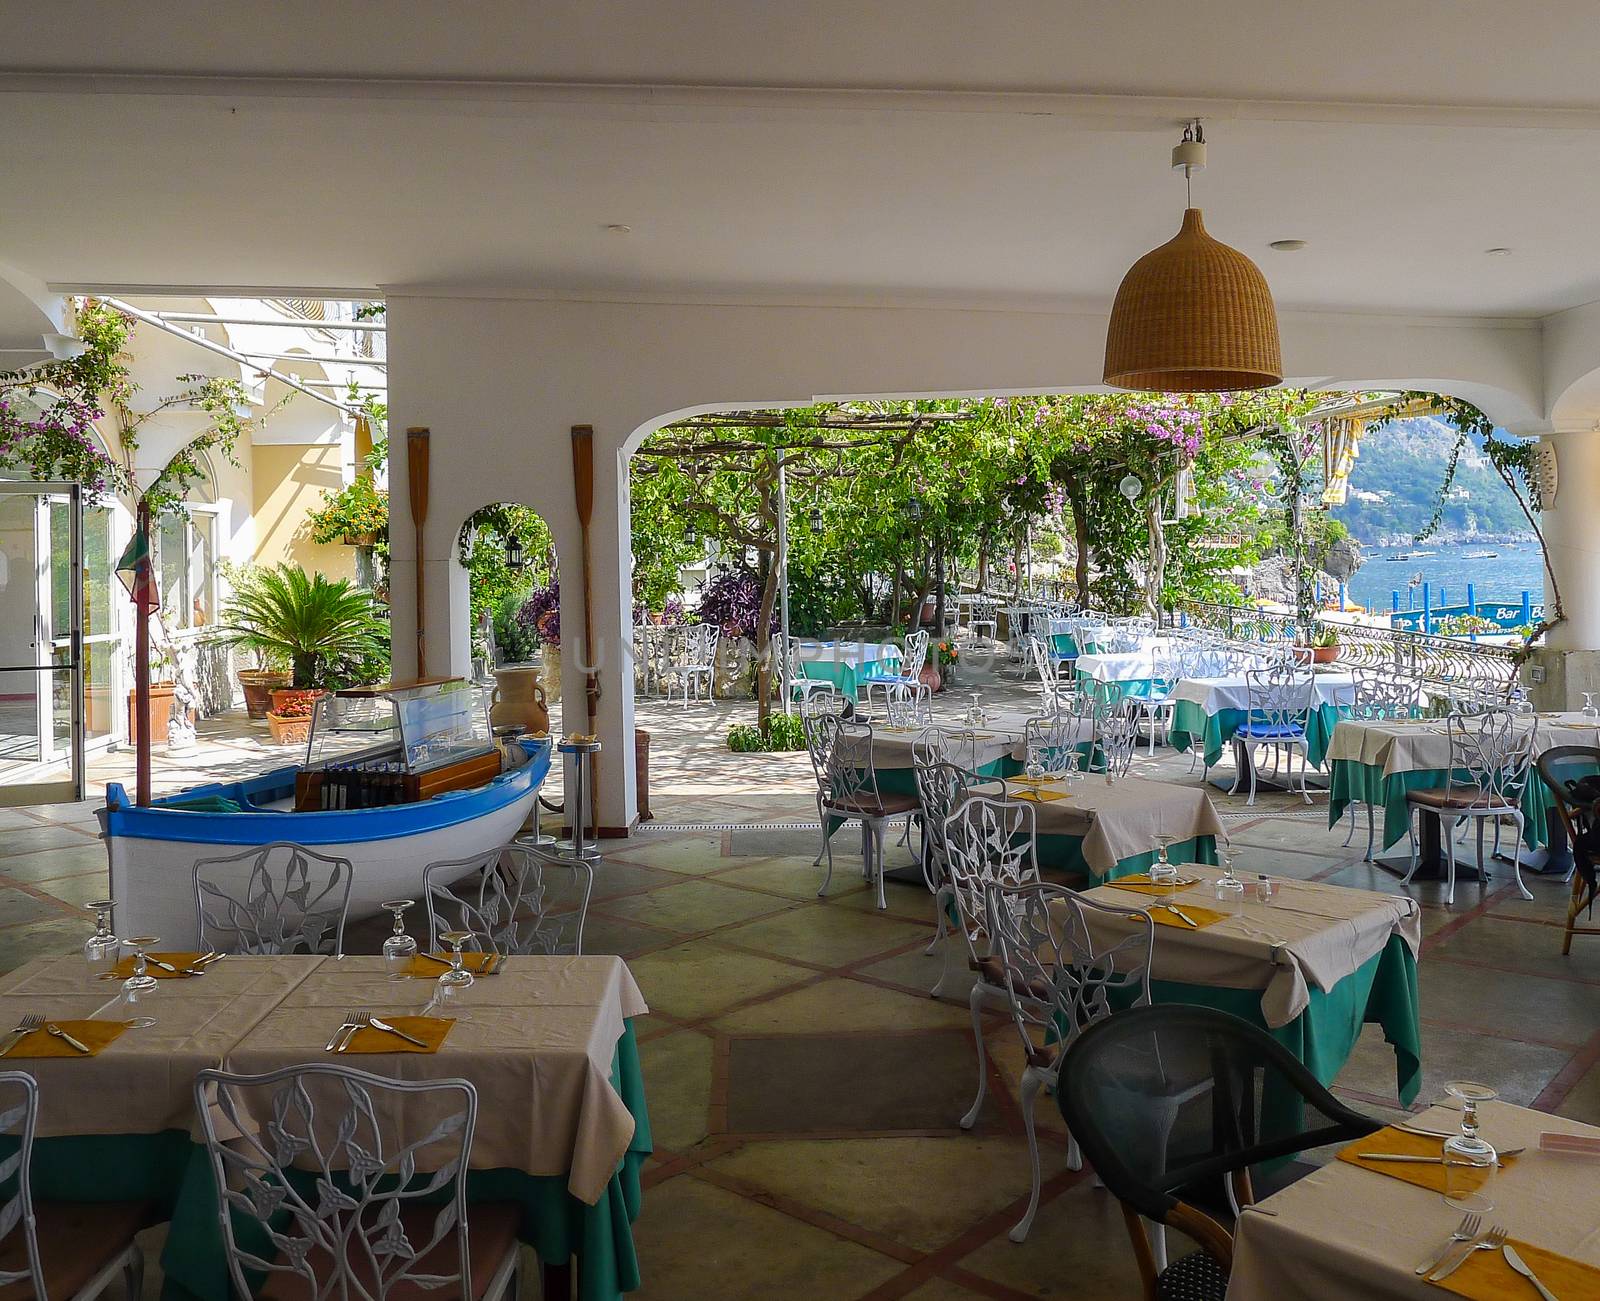 Beach front restaurant on the Amalfi coast with an interesting boat in the main restaurant itself